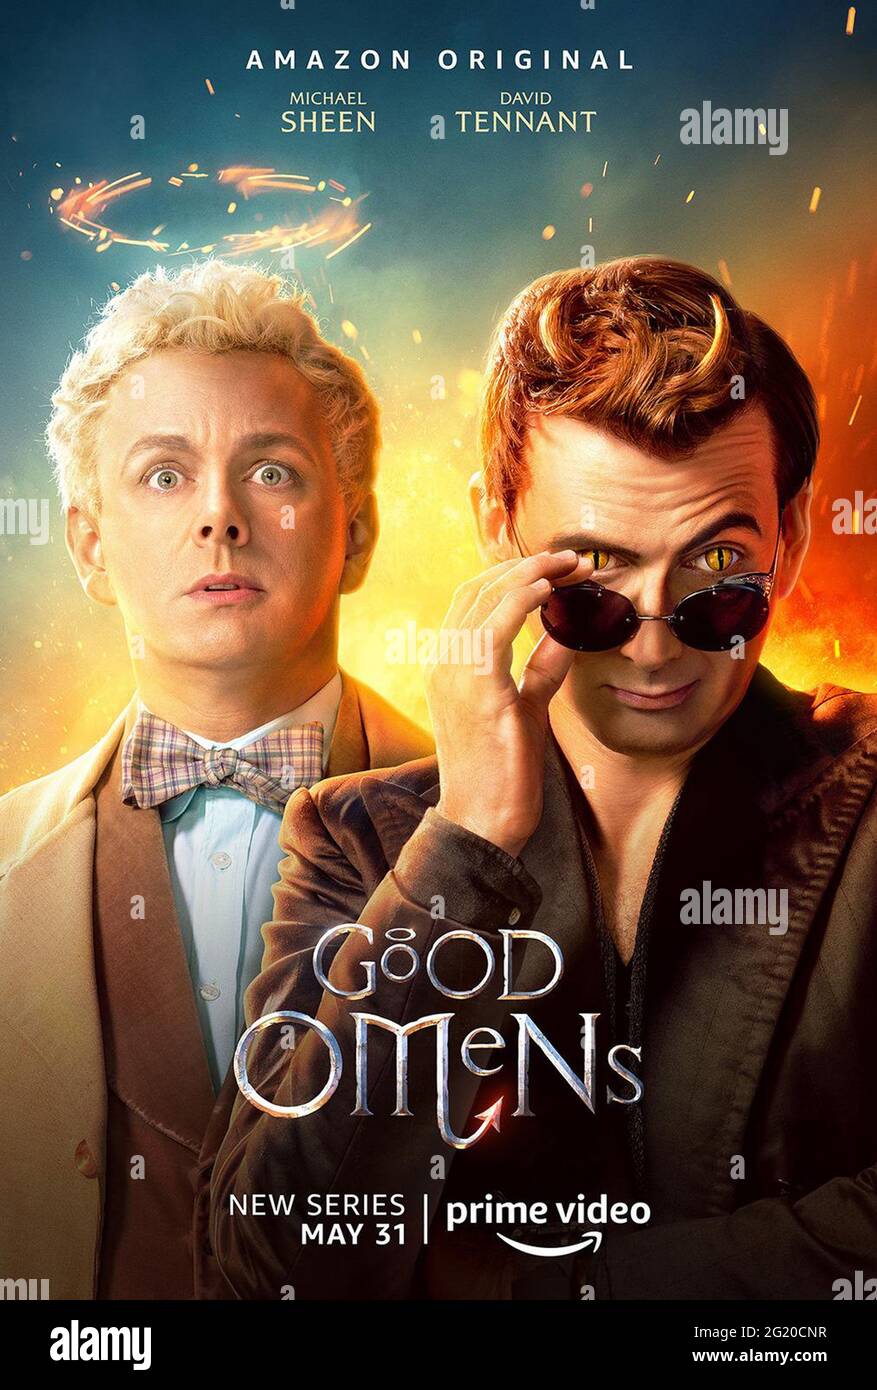 USA. David Tennant and Michael Sheen in the ©Amazon new series : Good Omens  (2019). PLOT: A tale of the bungling of Armageddon features an angel, a  demon, an eleven-year-old Antichrist, and